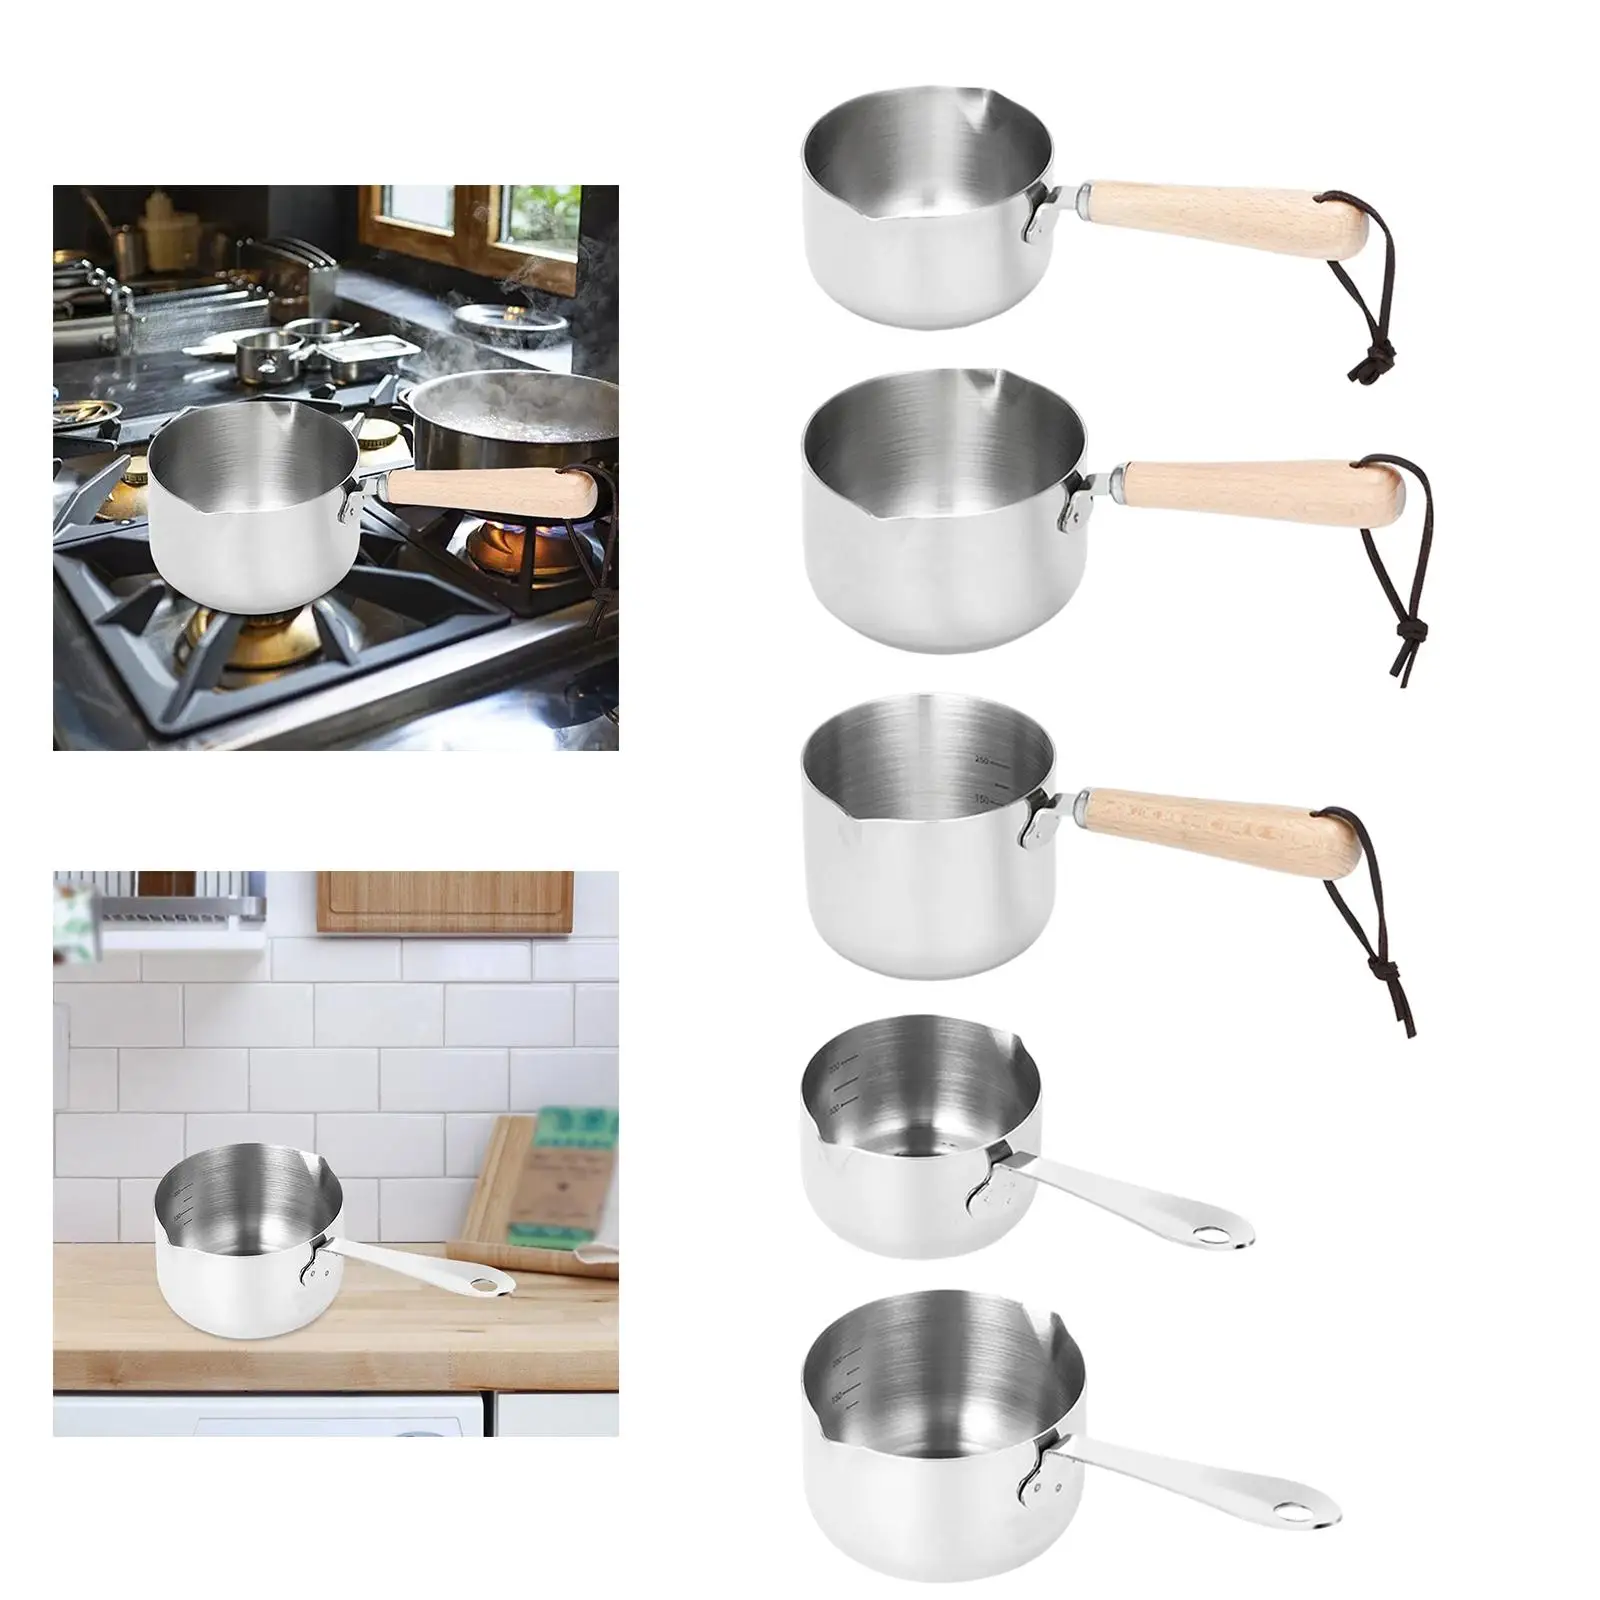 Water Cooking Pots Melting Butter Cookware with Long Handle Saucepan Soup Pot for Induction Cooker Camping RV Travel Home